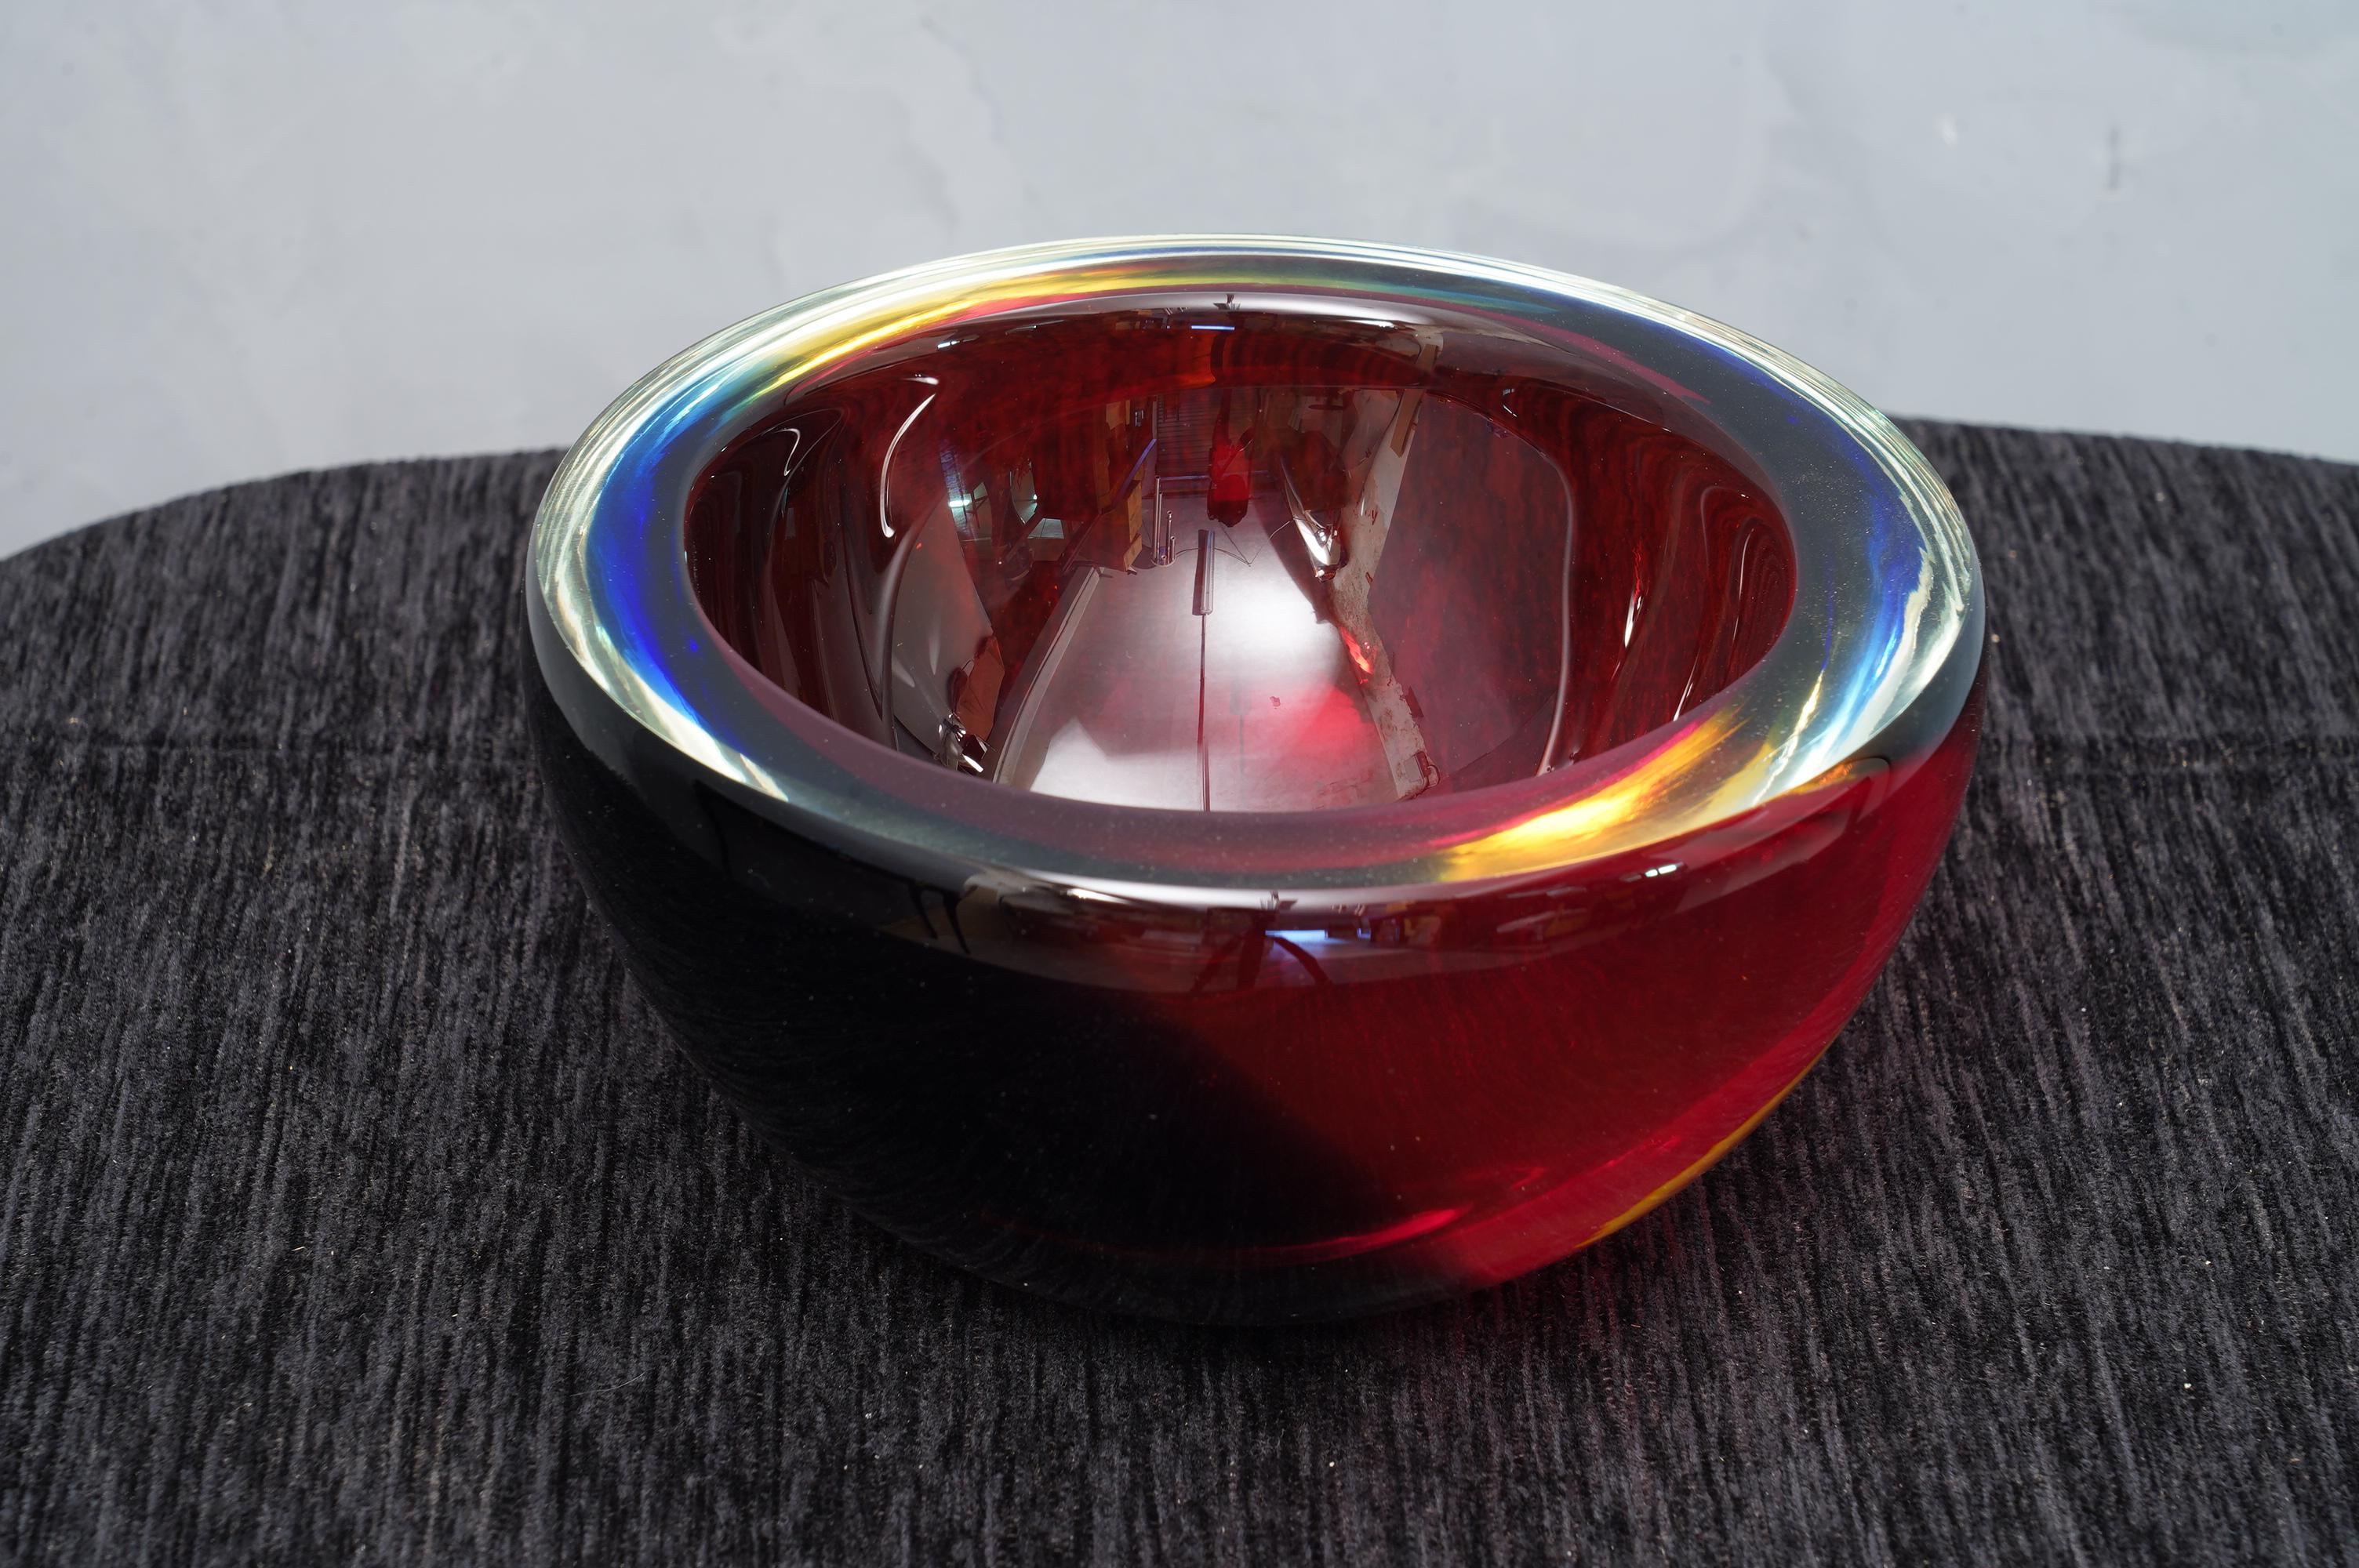 Ashtray formed by a particular submerged glass, signed Venini, with a wonderful double black and red color.

The ashtray is in Murano glass, circular in shape, and with a particular transparent red and black color. The signature is placed on the